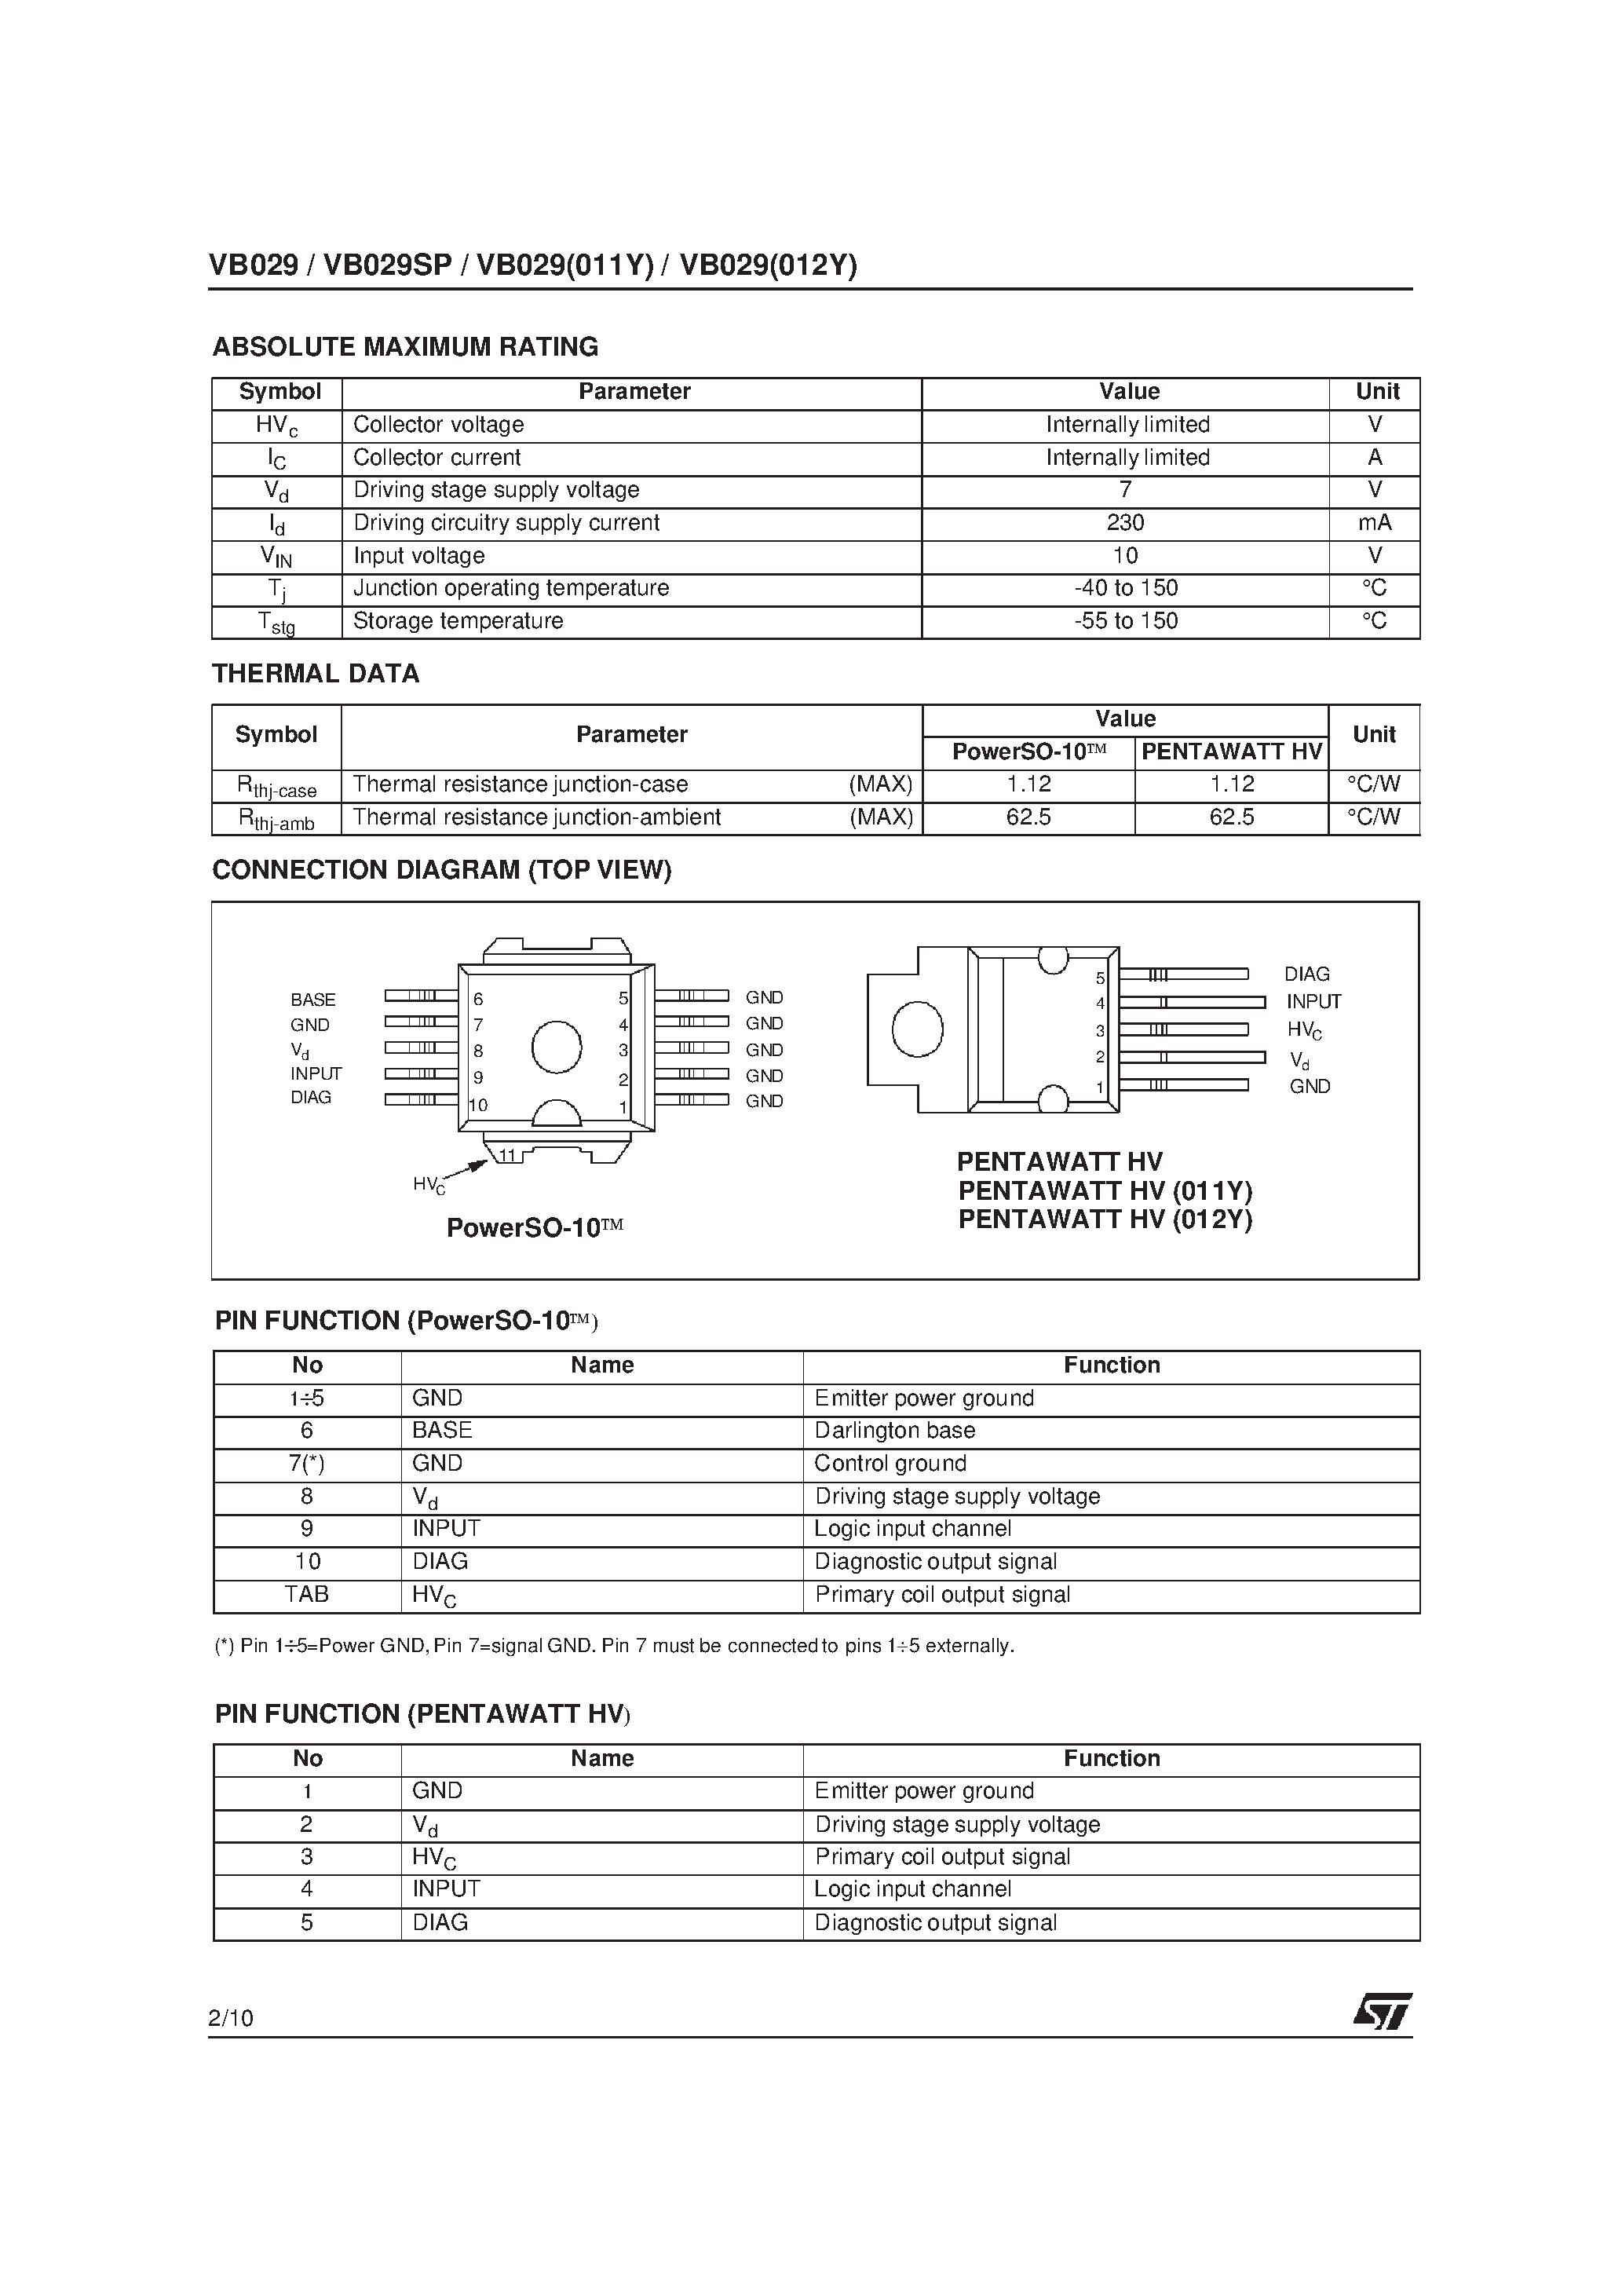 Datasheet VB029SP - HIGH VOLTAGE IGNITION COIL DRIVER POWER I.C. page 2